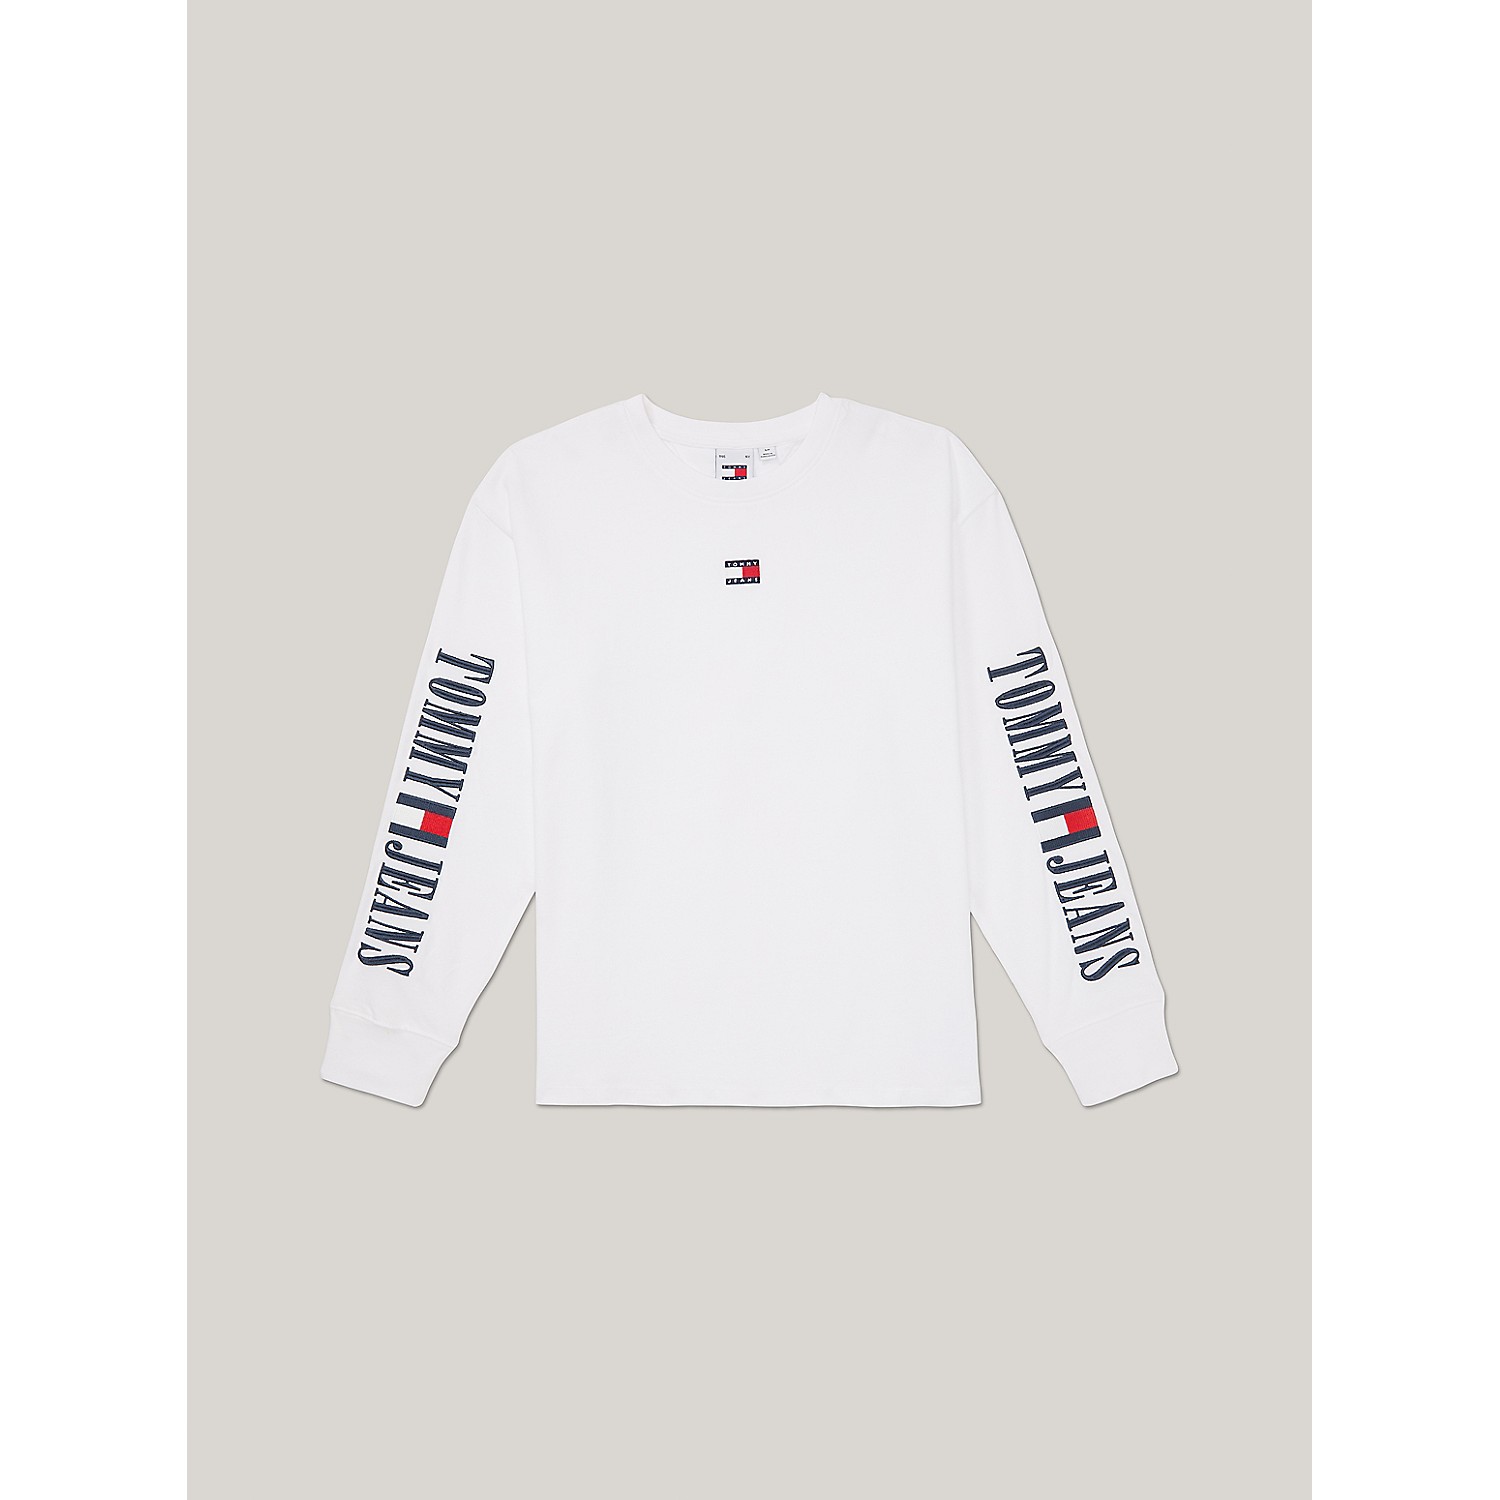 TOMMY HILFIGER Long-Sleeve Archive Logo T-Shirt